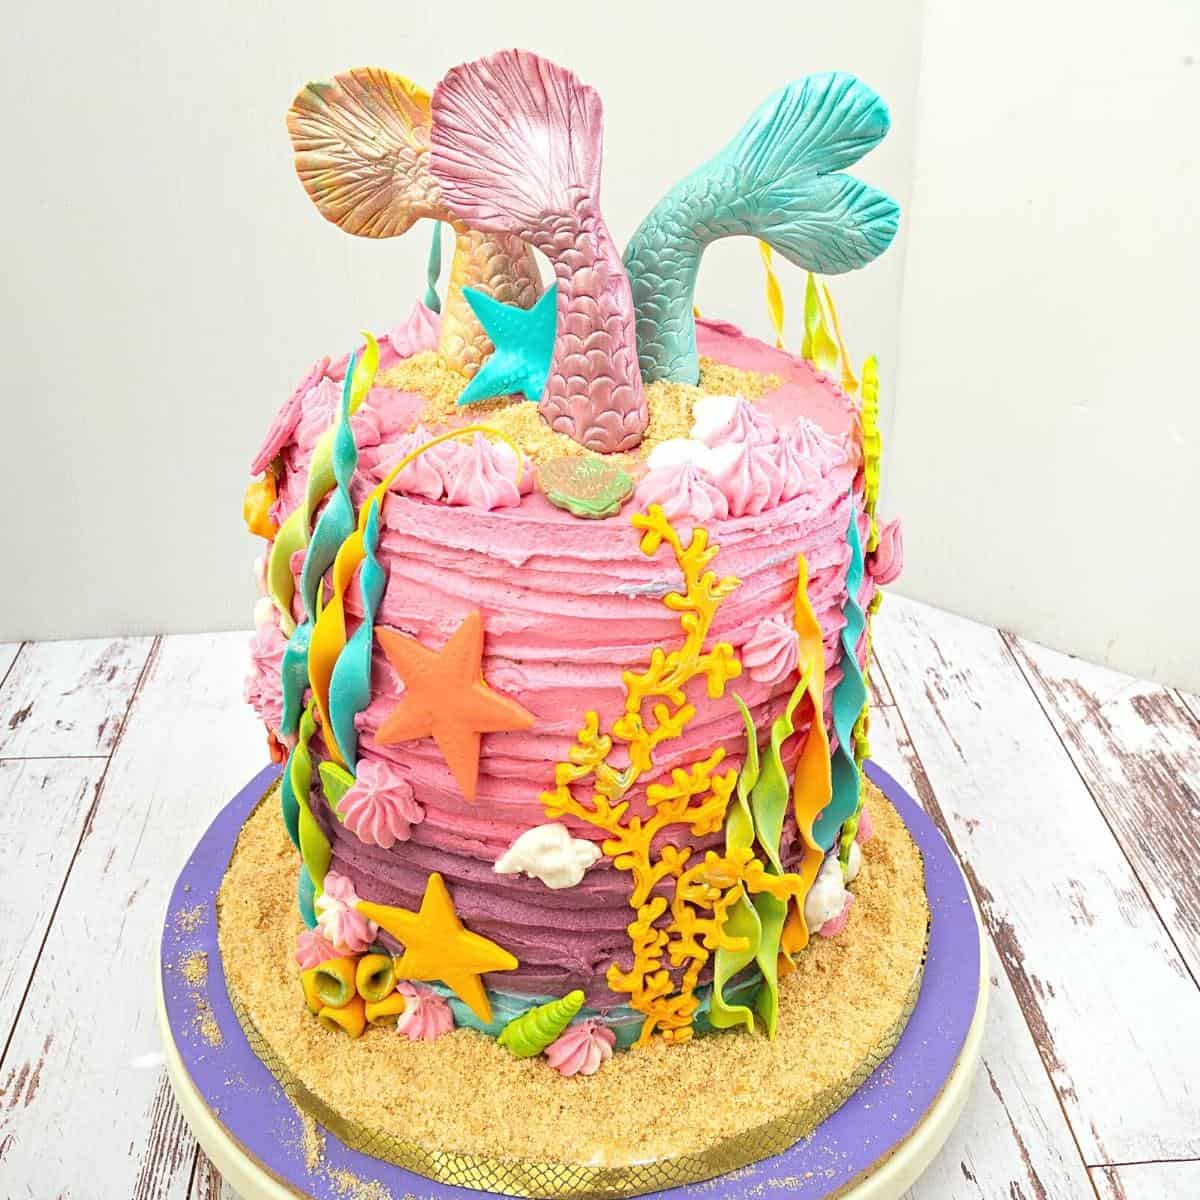 A buttercream cake frosted in mermaid colors.